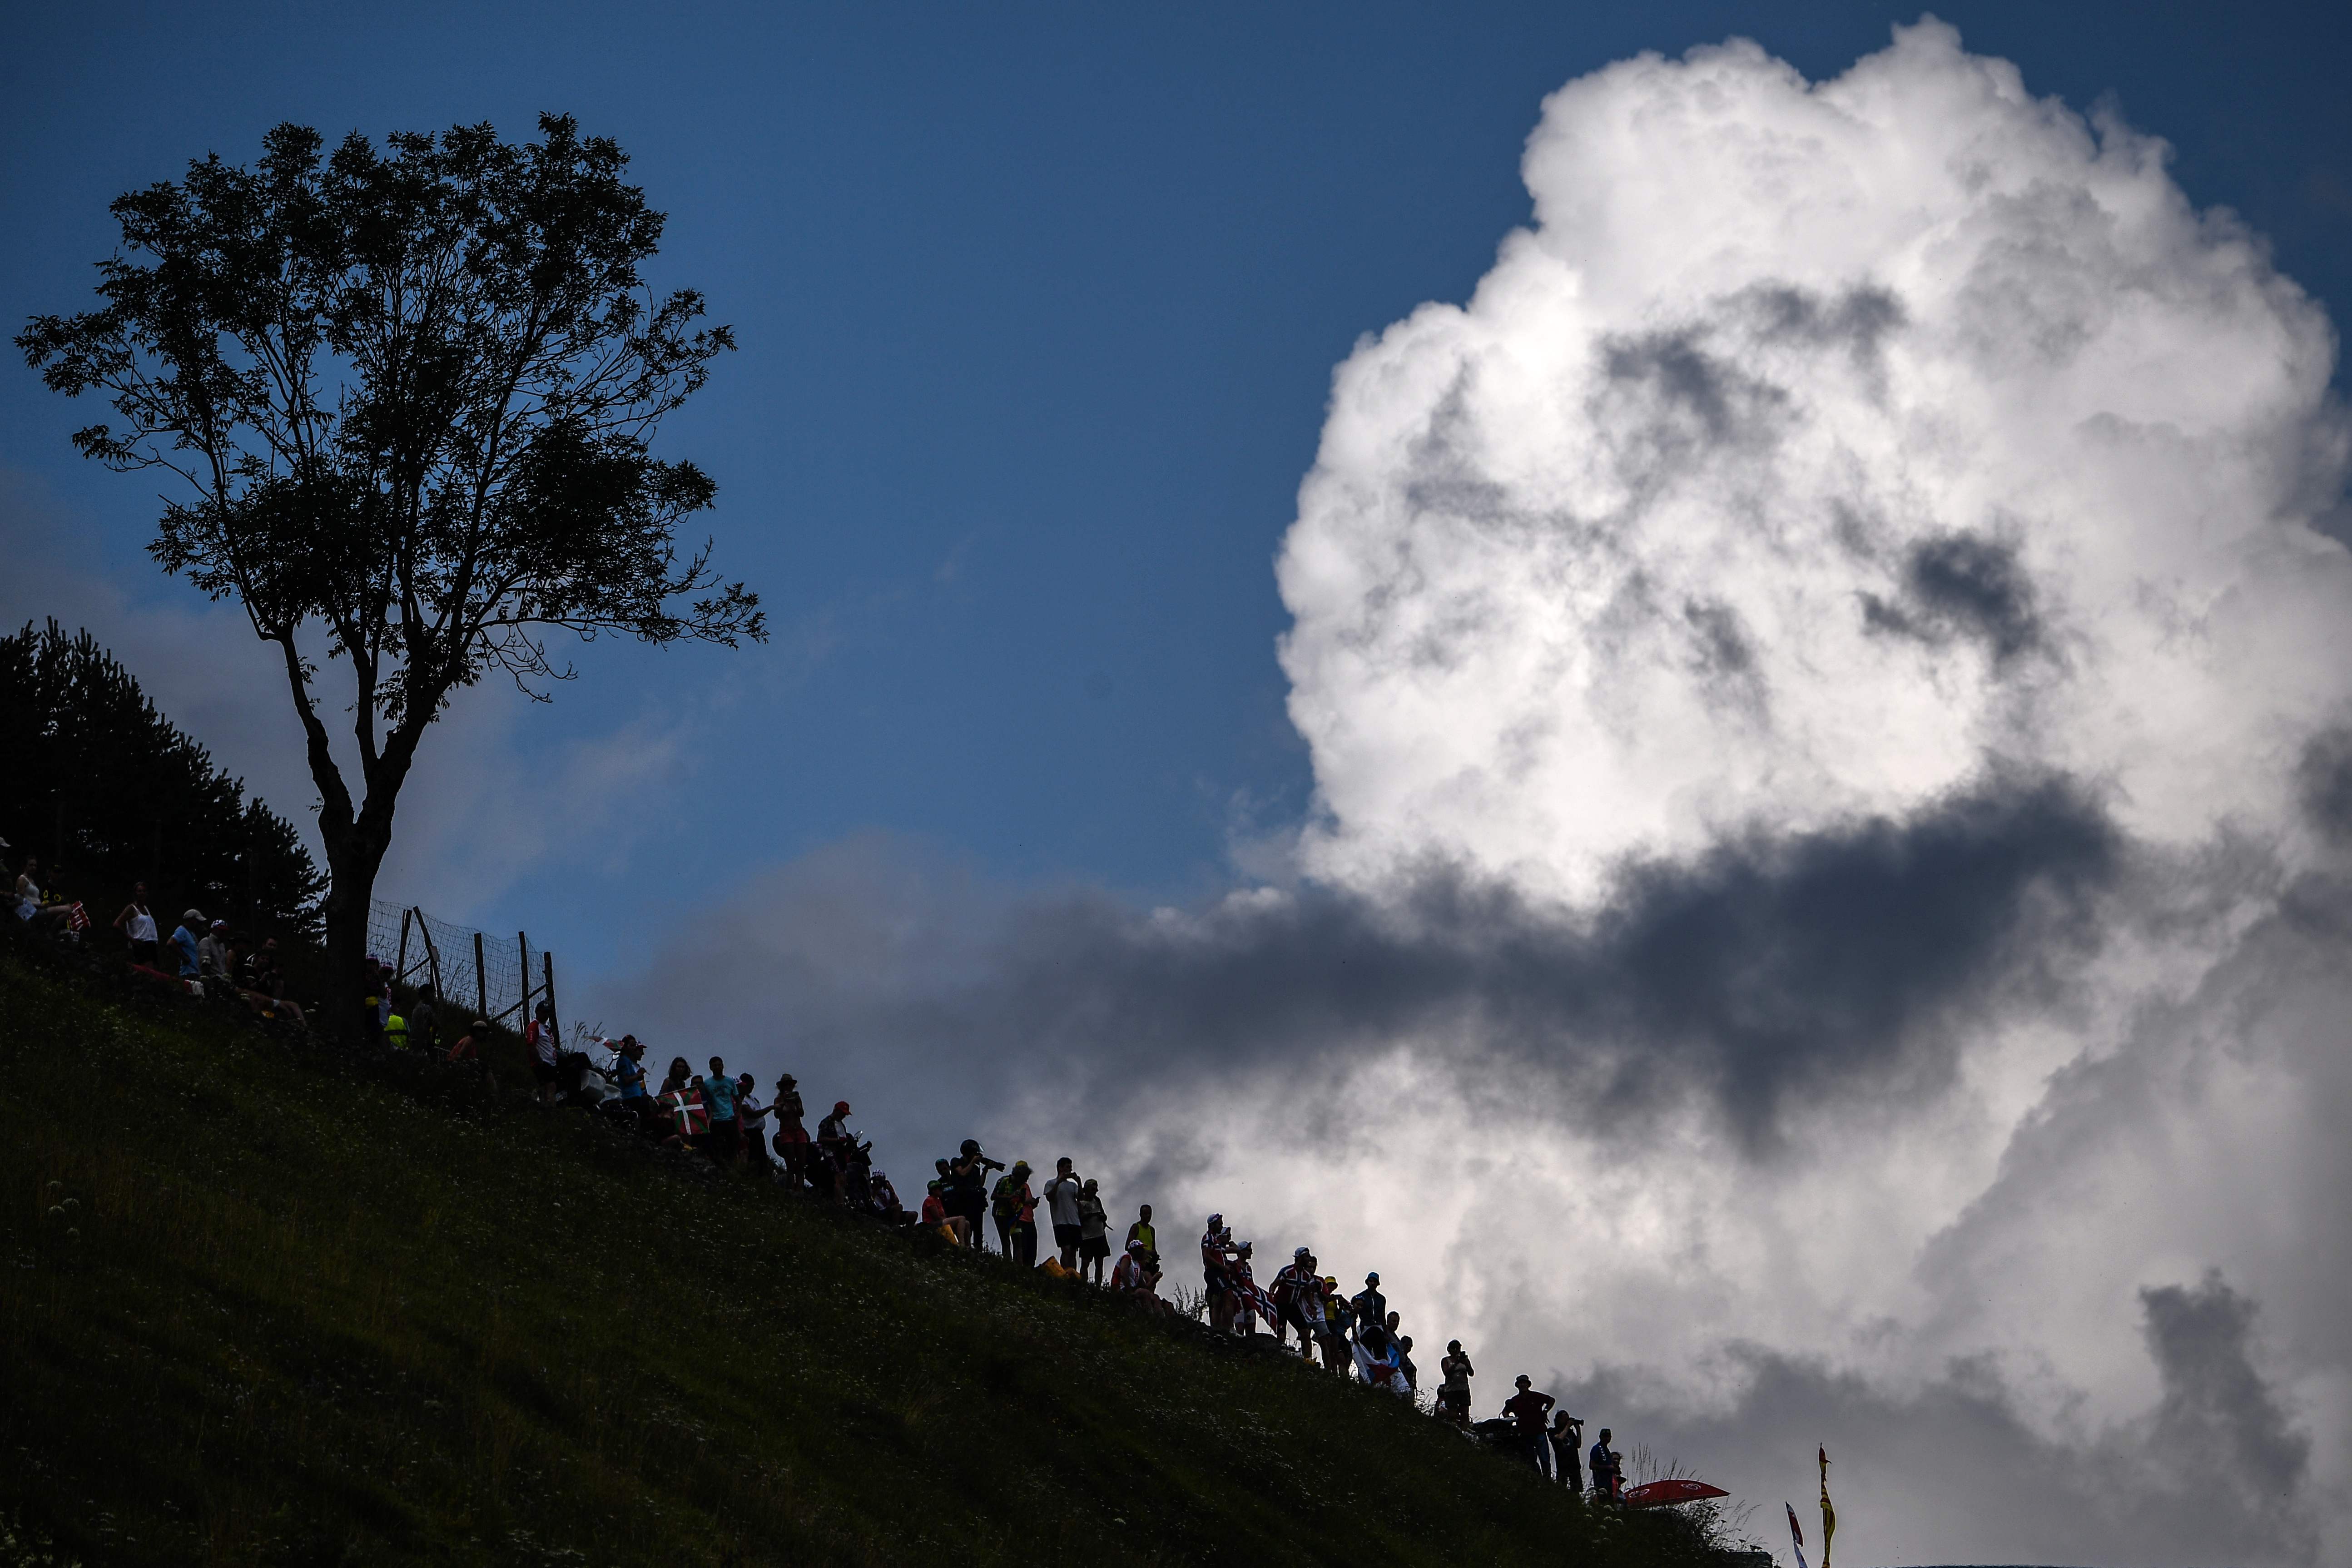 Spectators gather on a slope of the first pass during the 17th stage of the 105th edition of the Tour de France cycling race between Bagneres-de-Luchon and Saint-Lary-Soulan Col du Portet, France, on July 25, 2018.